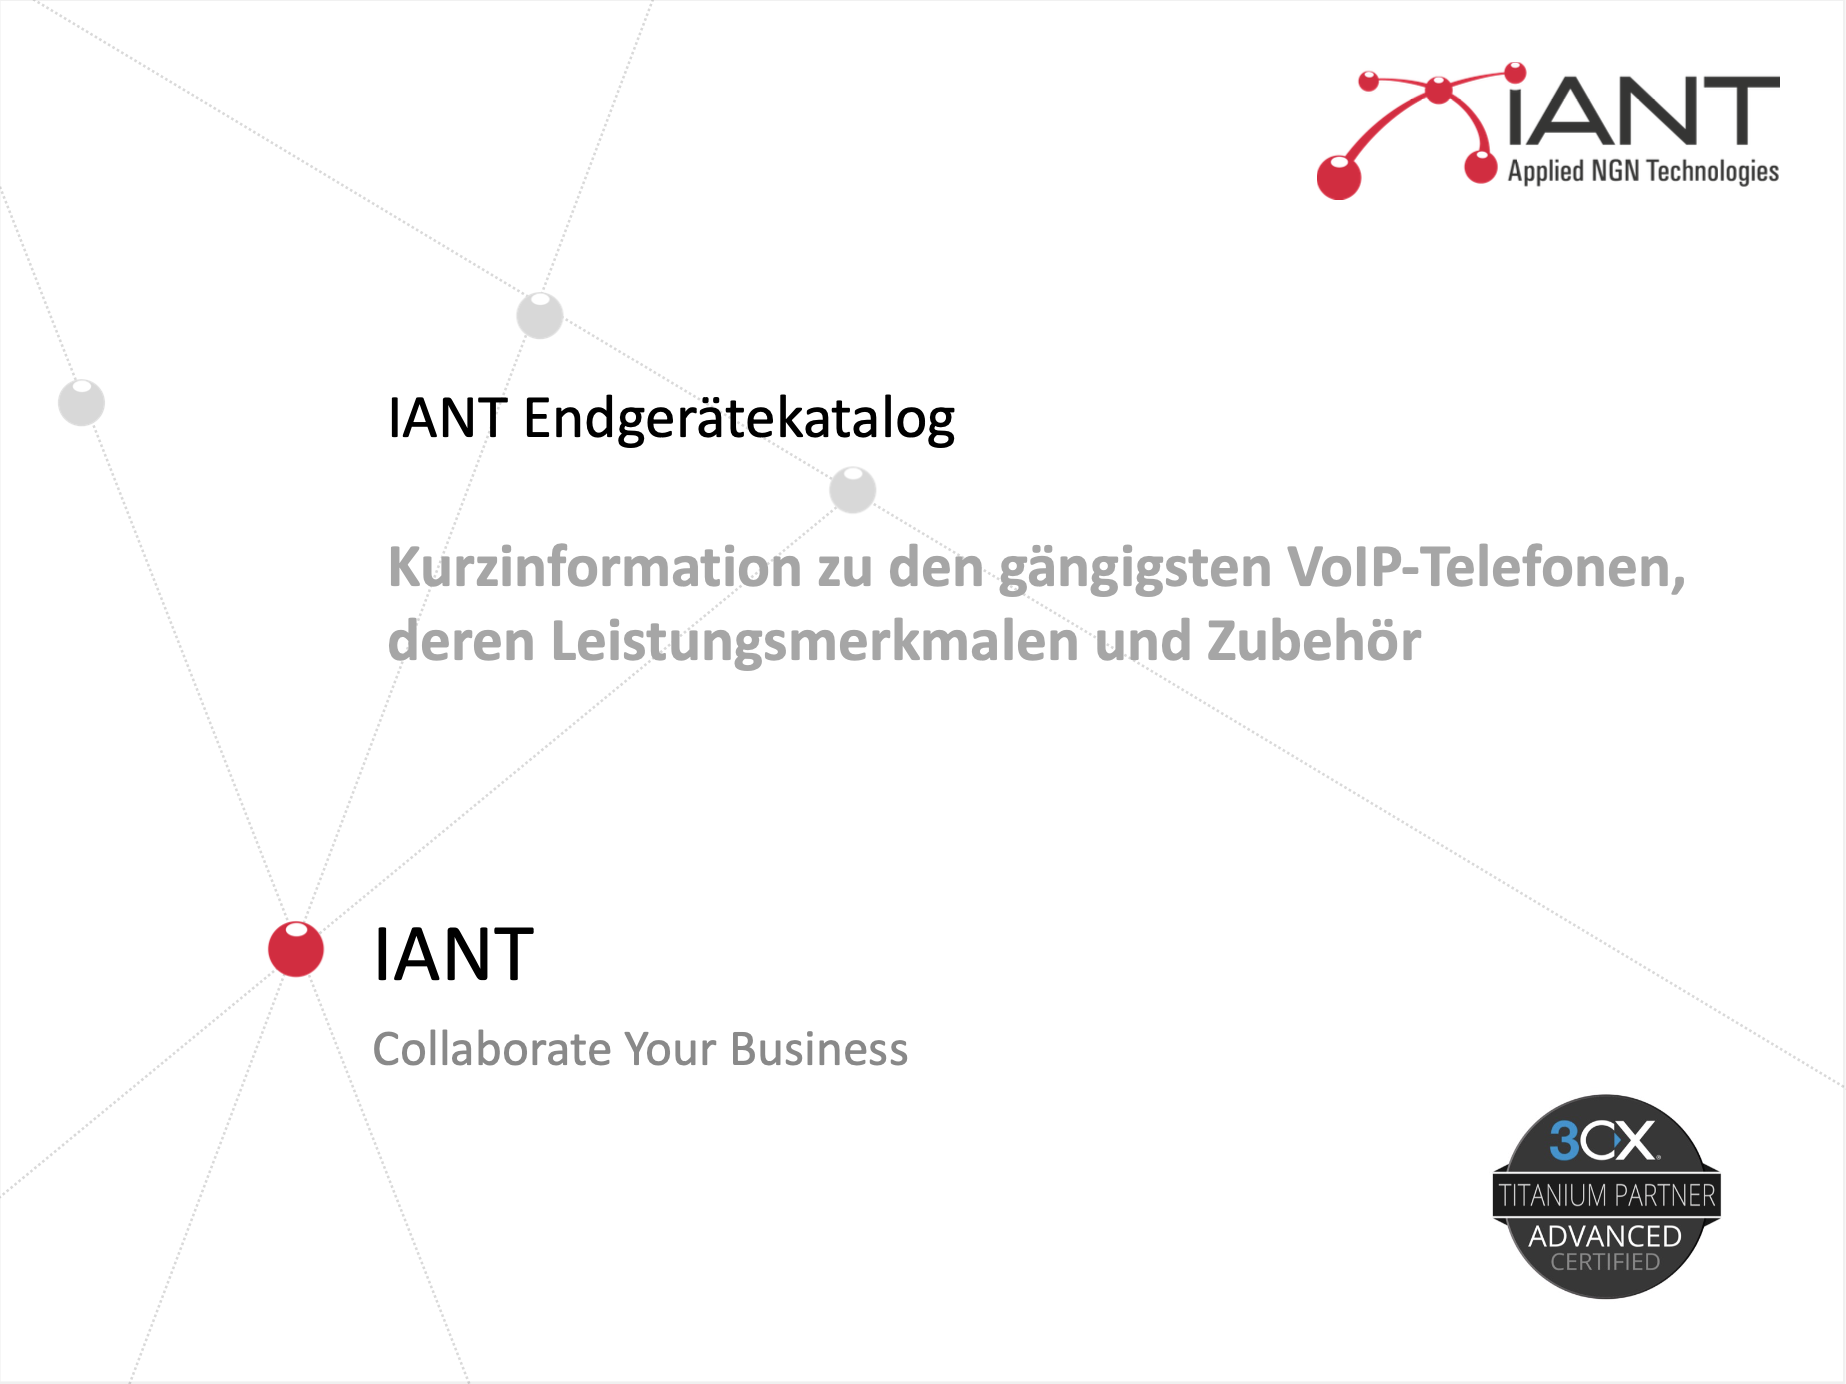 Terminal Equipment for IANT Solutions